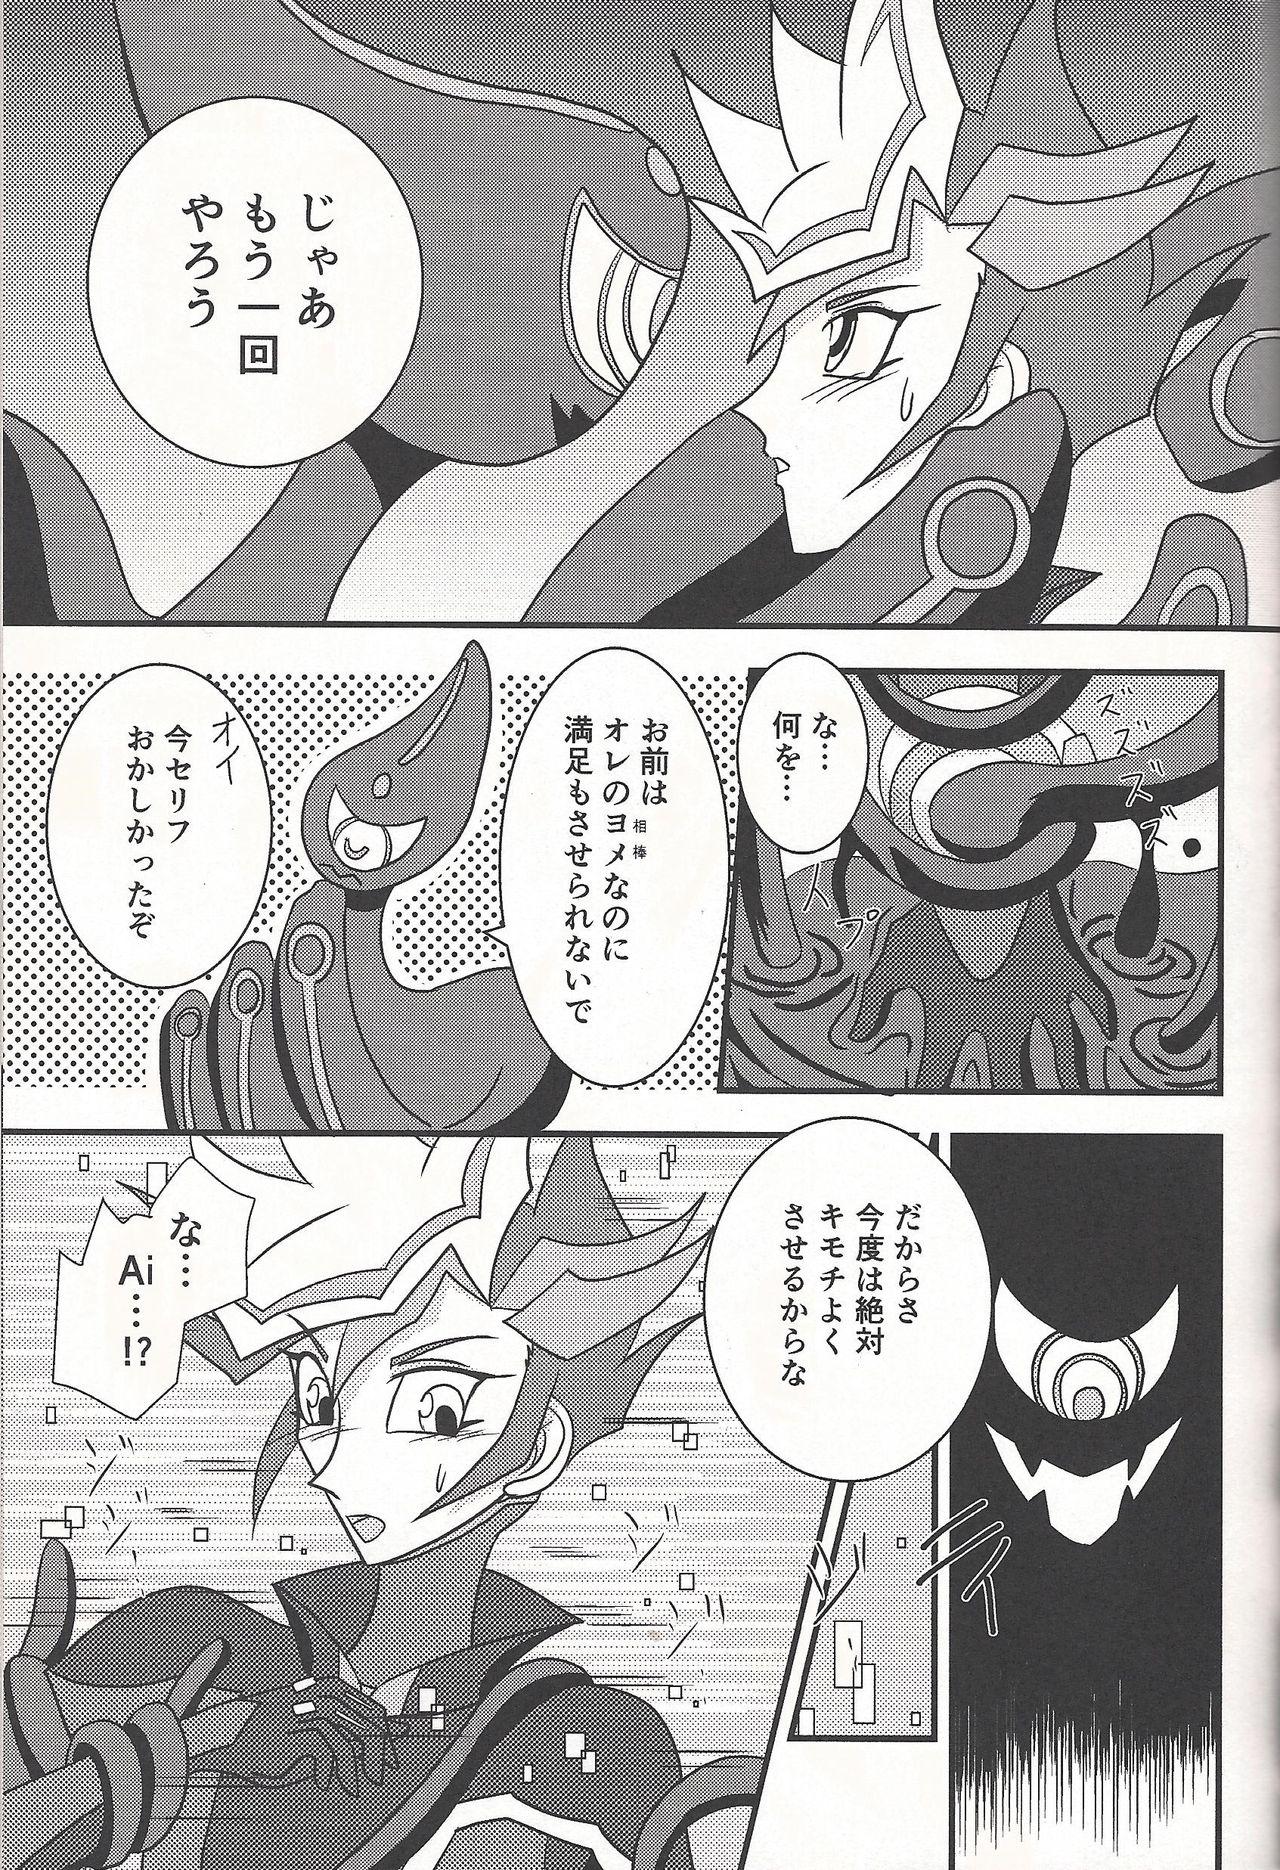 Adorable Mirrors gate - Yu gi oh vrains Machine - Page 8